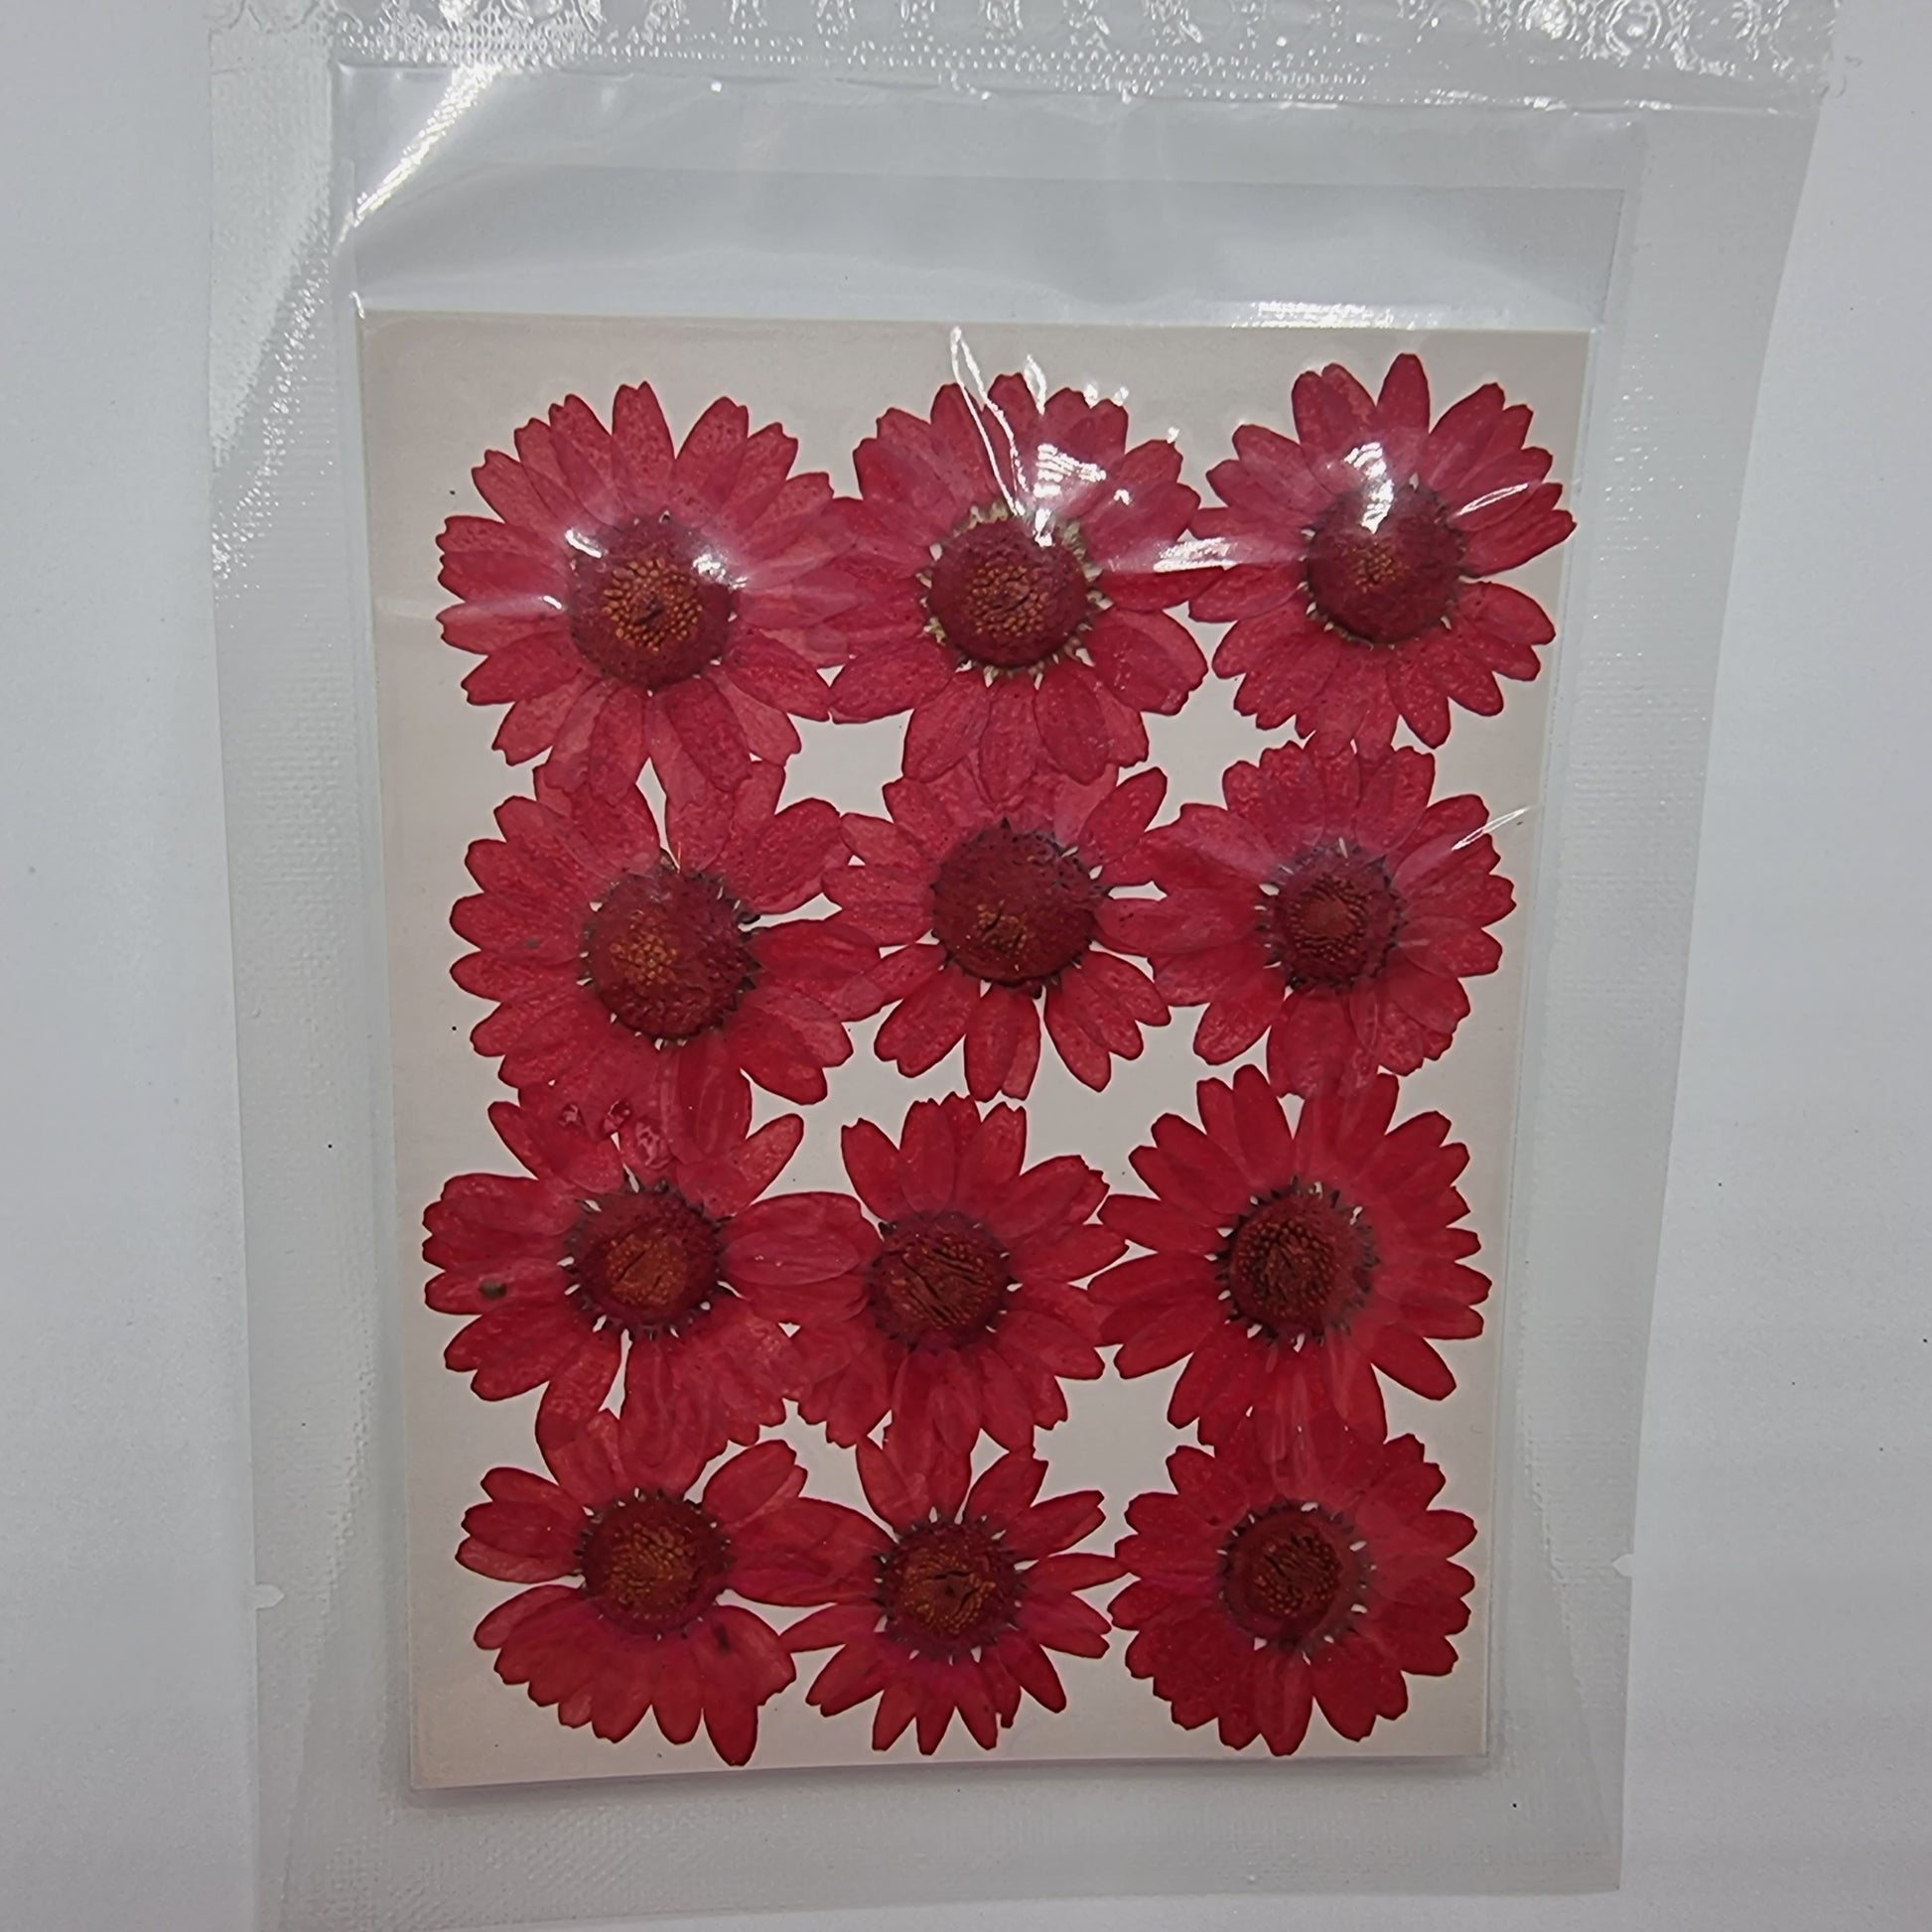 Dried Pressed Flowers - Red Daisies Large - Mystic Art Glitters